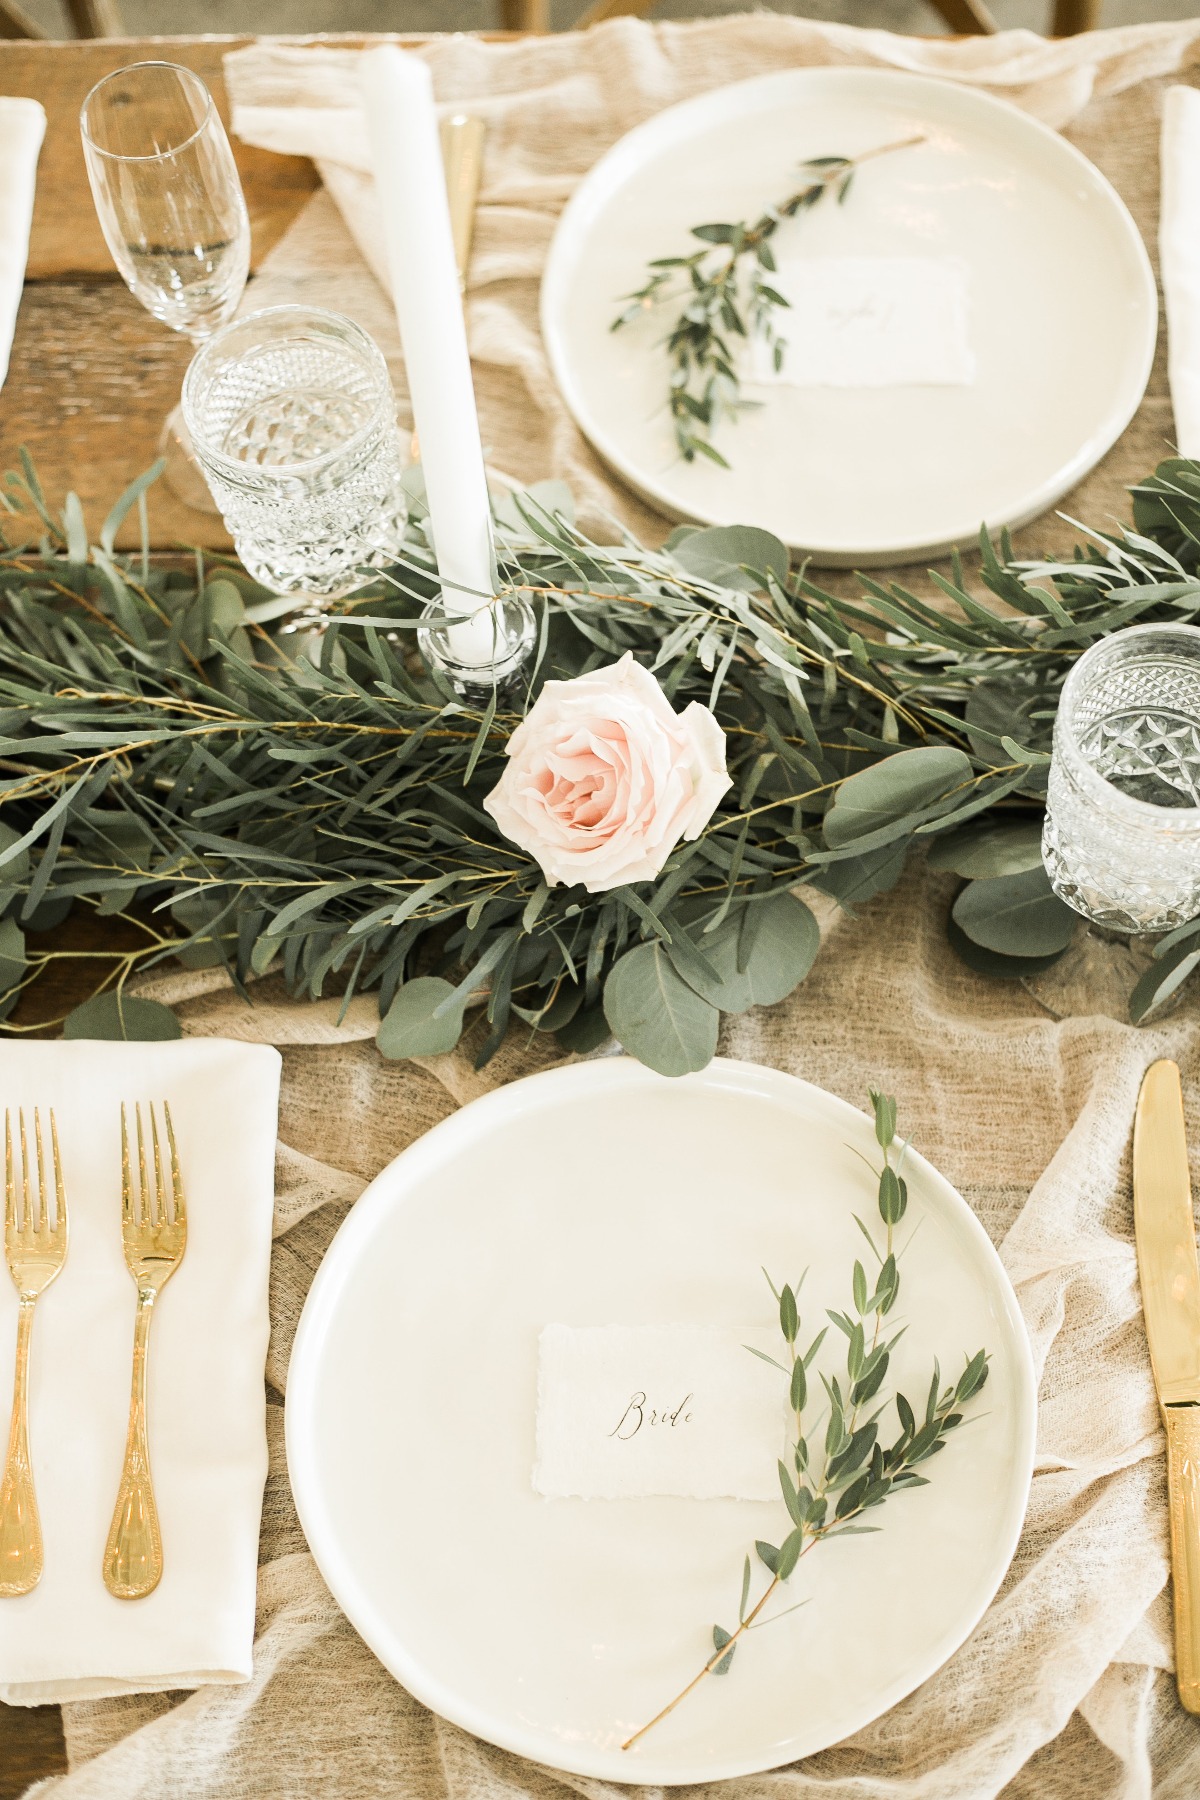 This White-Washed Organic Chic Wedding is What Dreams are Made of